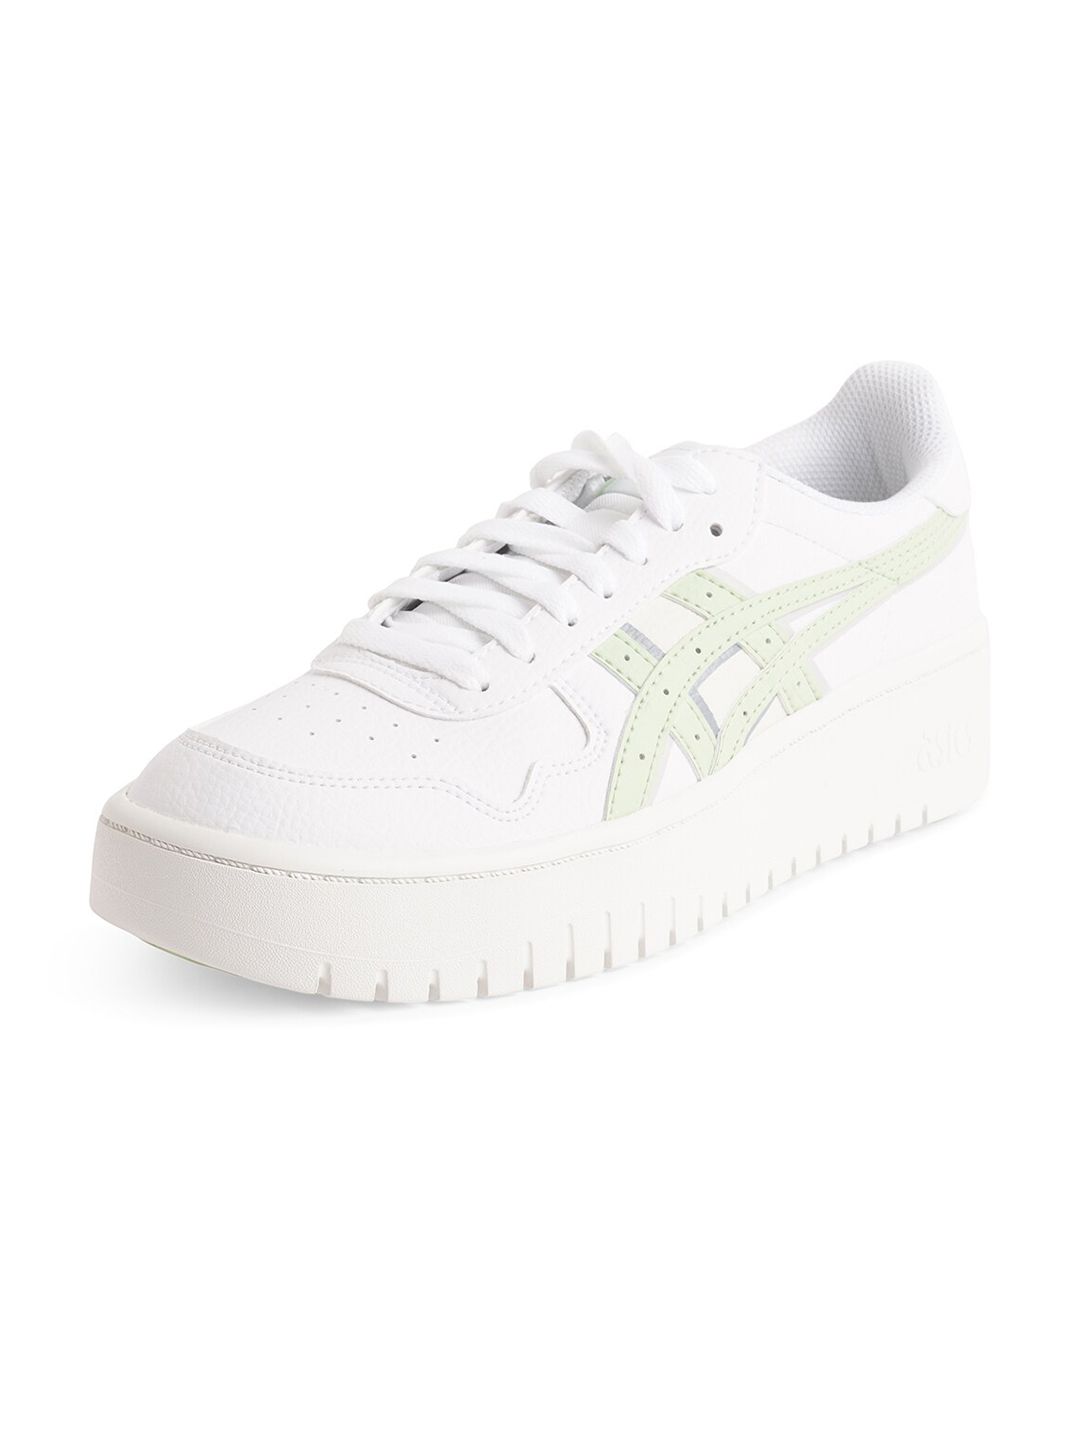 ASICS Women White Japan S Pf Training or Gym Shoes Price in India